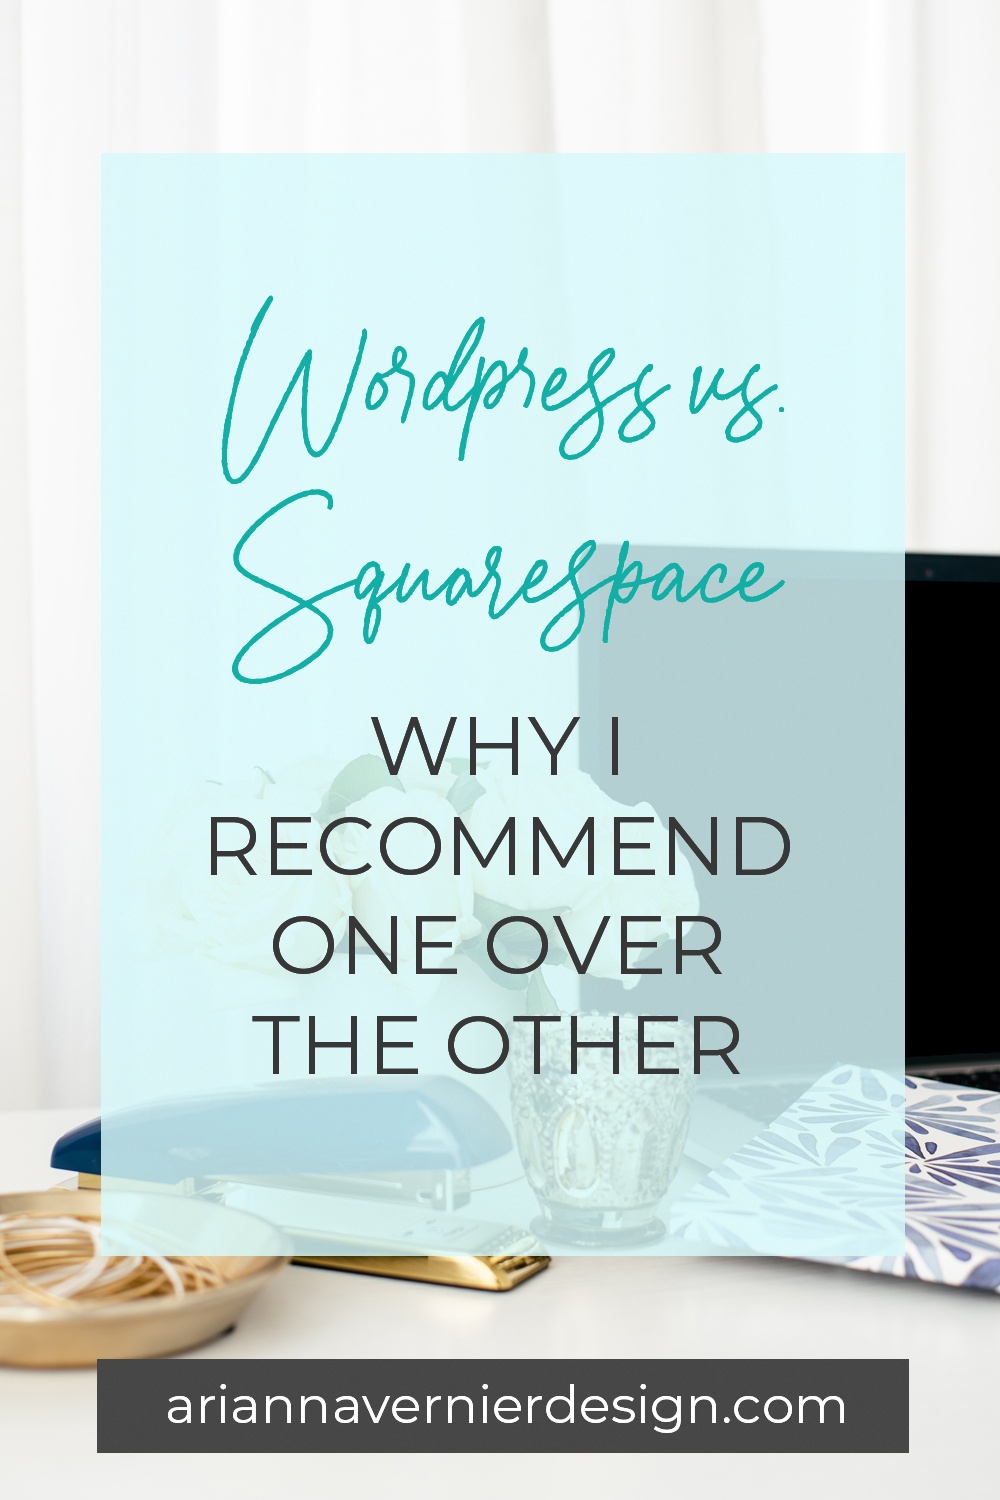 Pinterest pin with a desk and a computer in the background, with a light blue rectangle over top, and the title "Wordpress Vs. Squarespace - Why I Recommend One Over the Other"